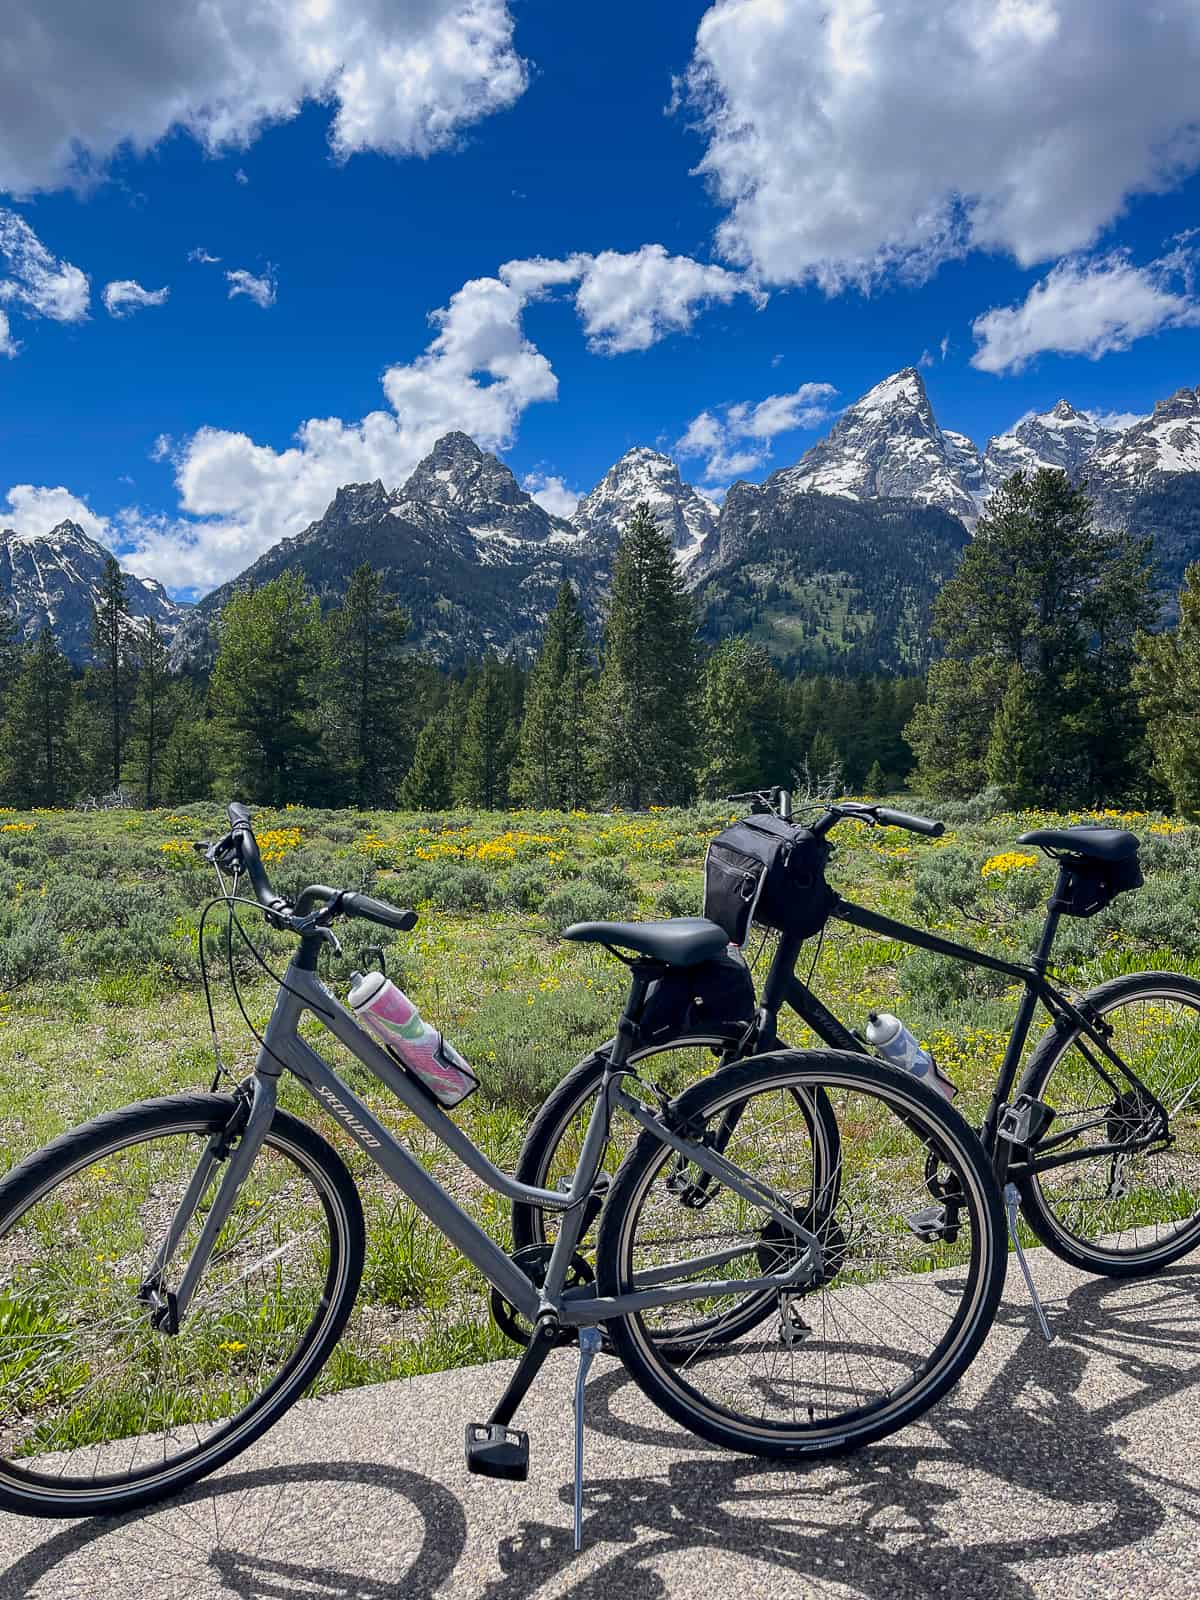 Our bikes with mountains in the background.